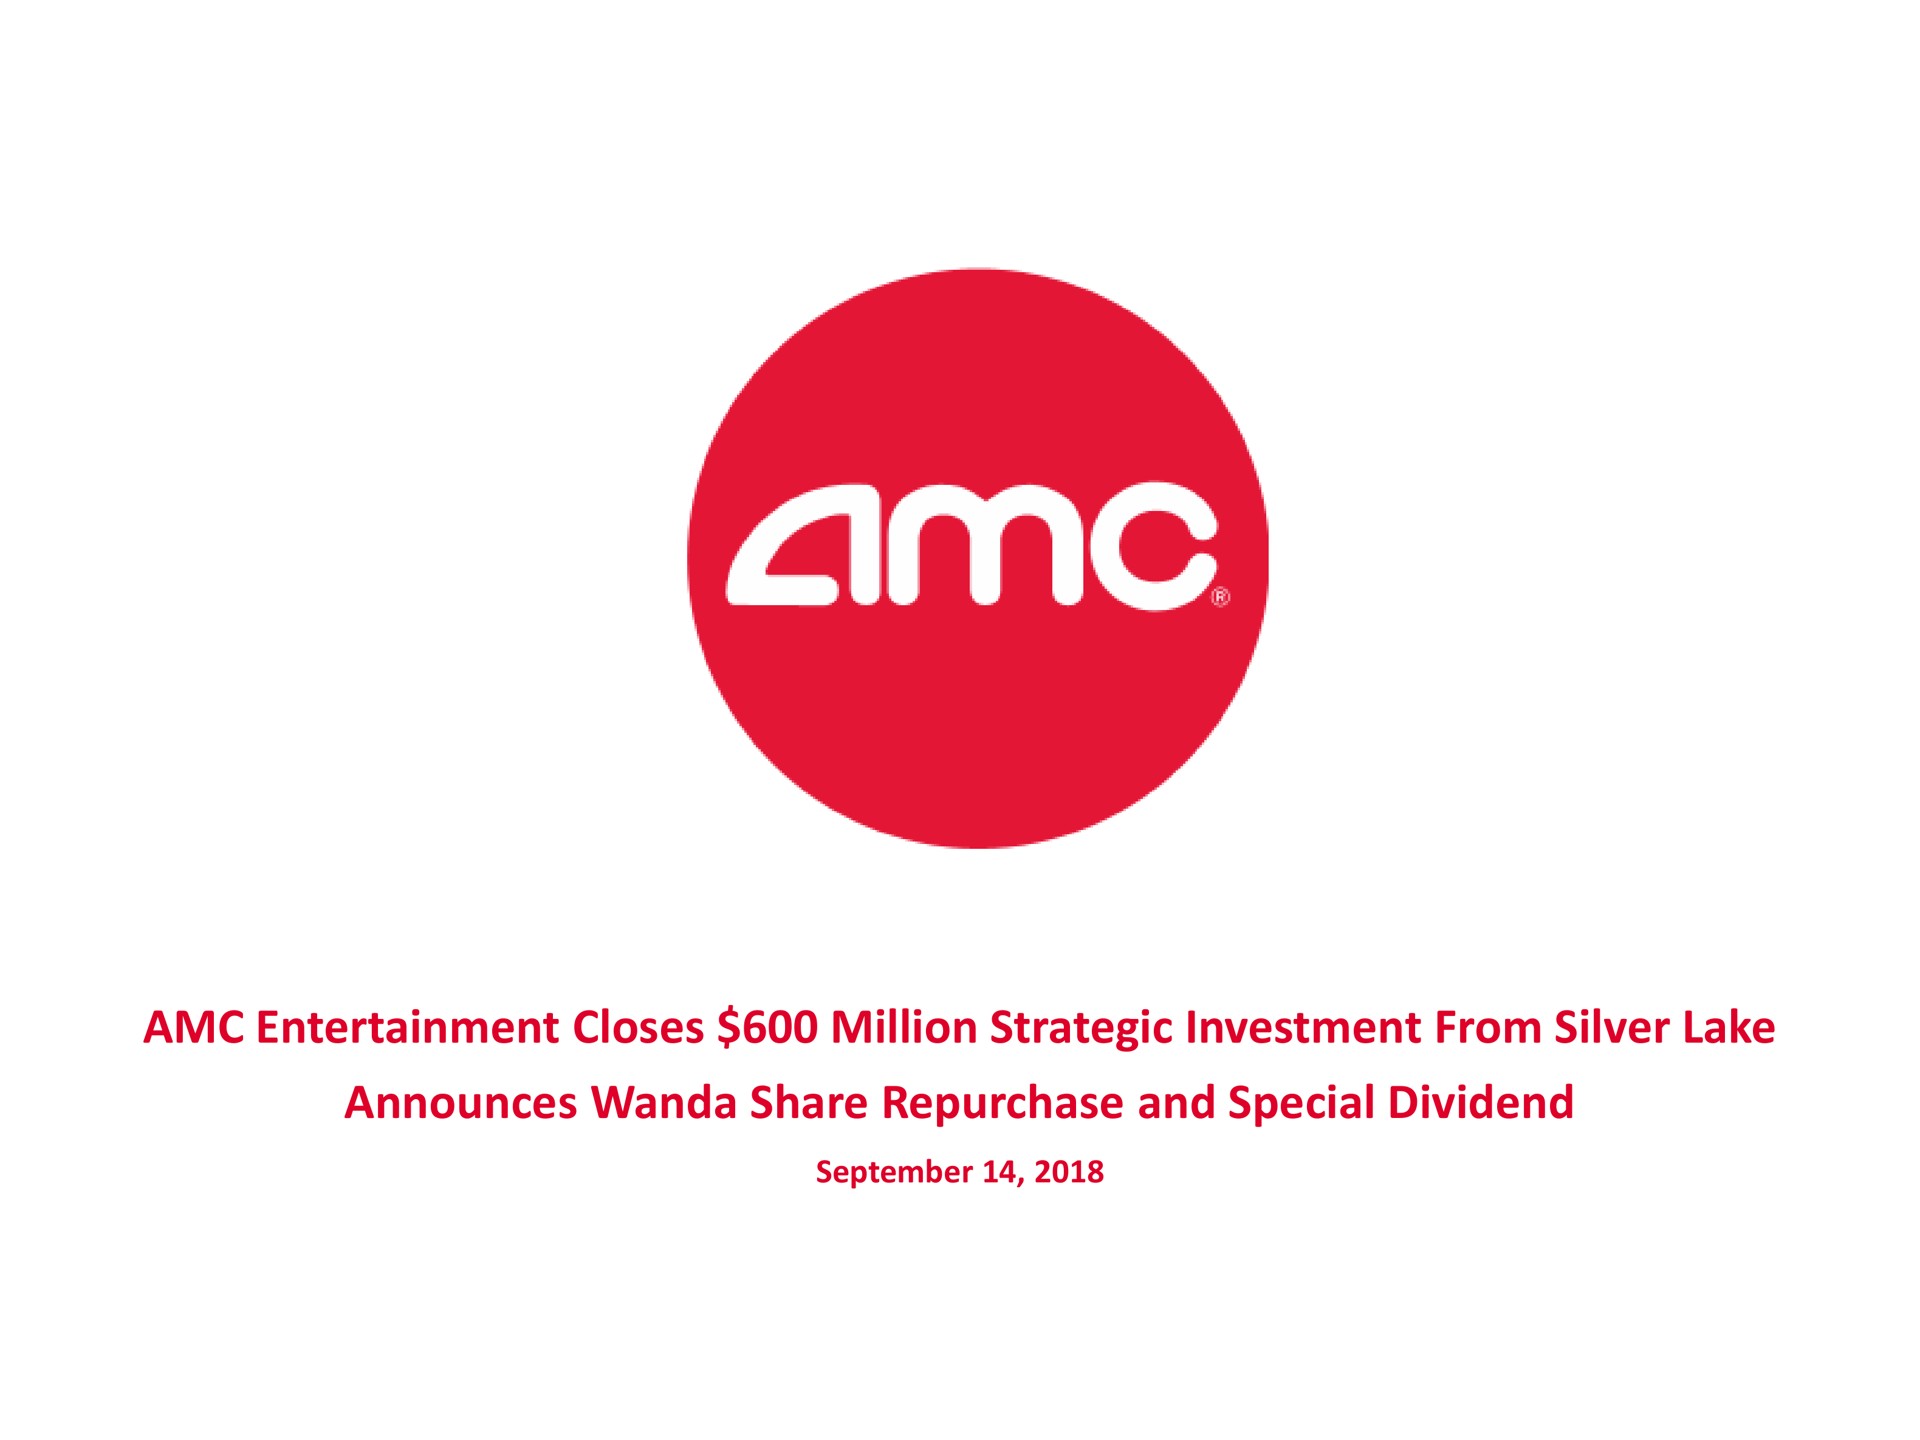 entertainment closes million strategic investment from silver lake announces share repurchase and special dividend | AMC